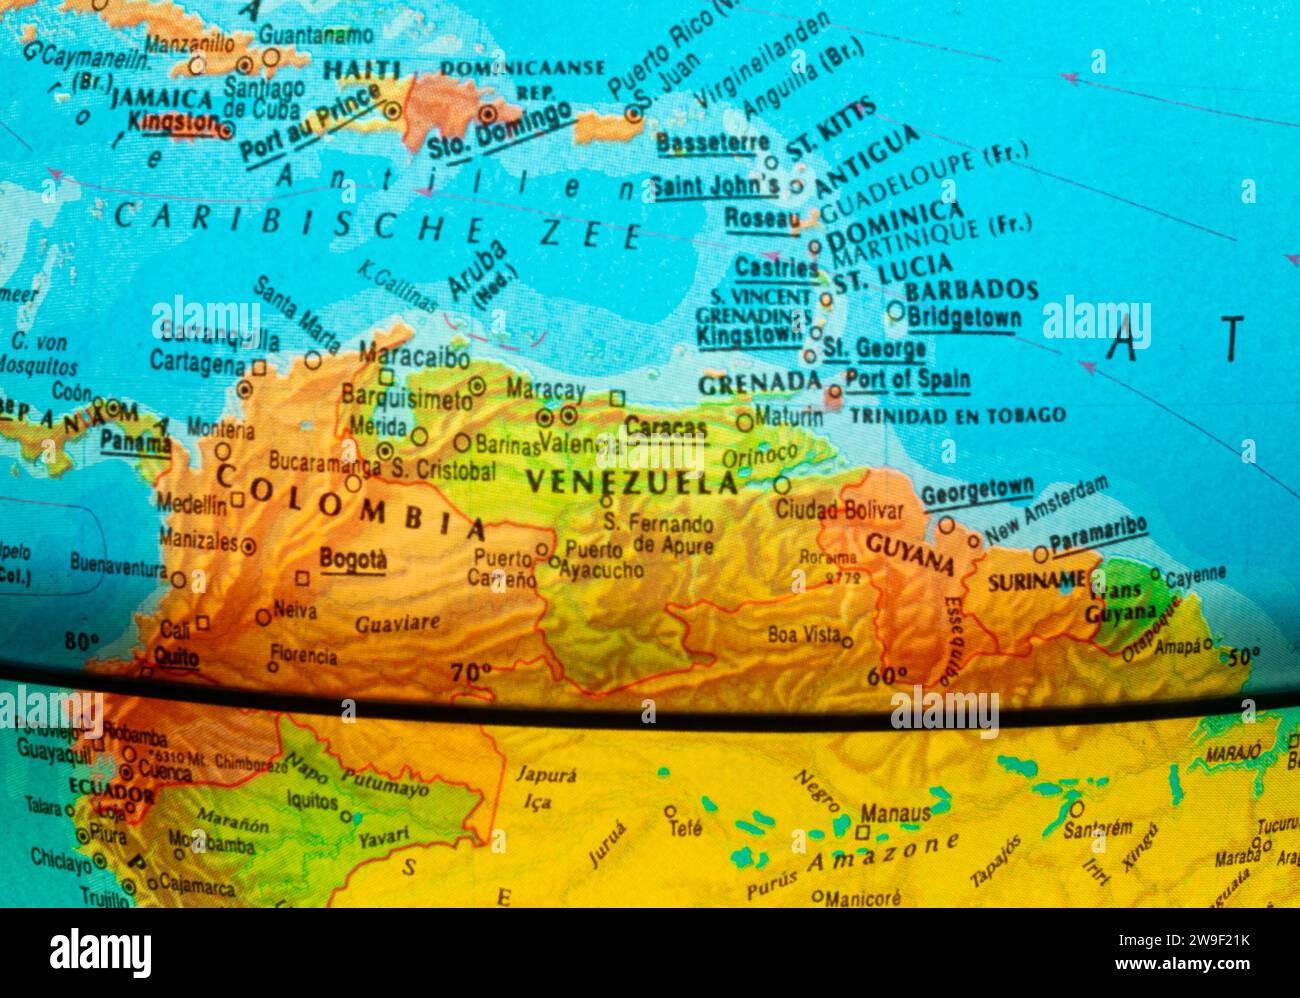 Part of the globe where the northern part of South-America and a part of the Caribbean Sea is displayed. The thick curved black line is the equator. Stock Photo